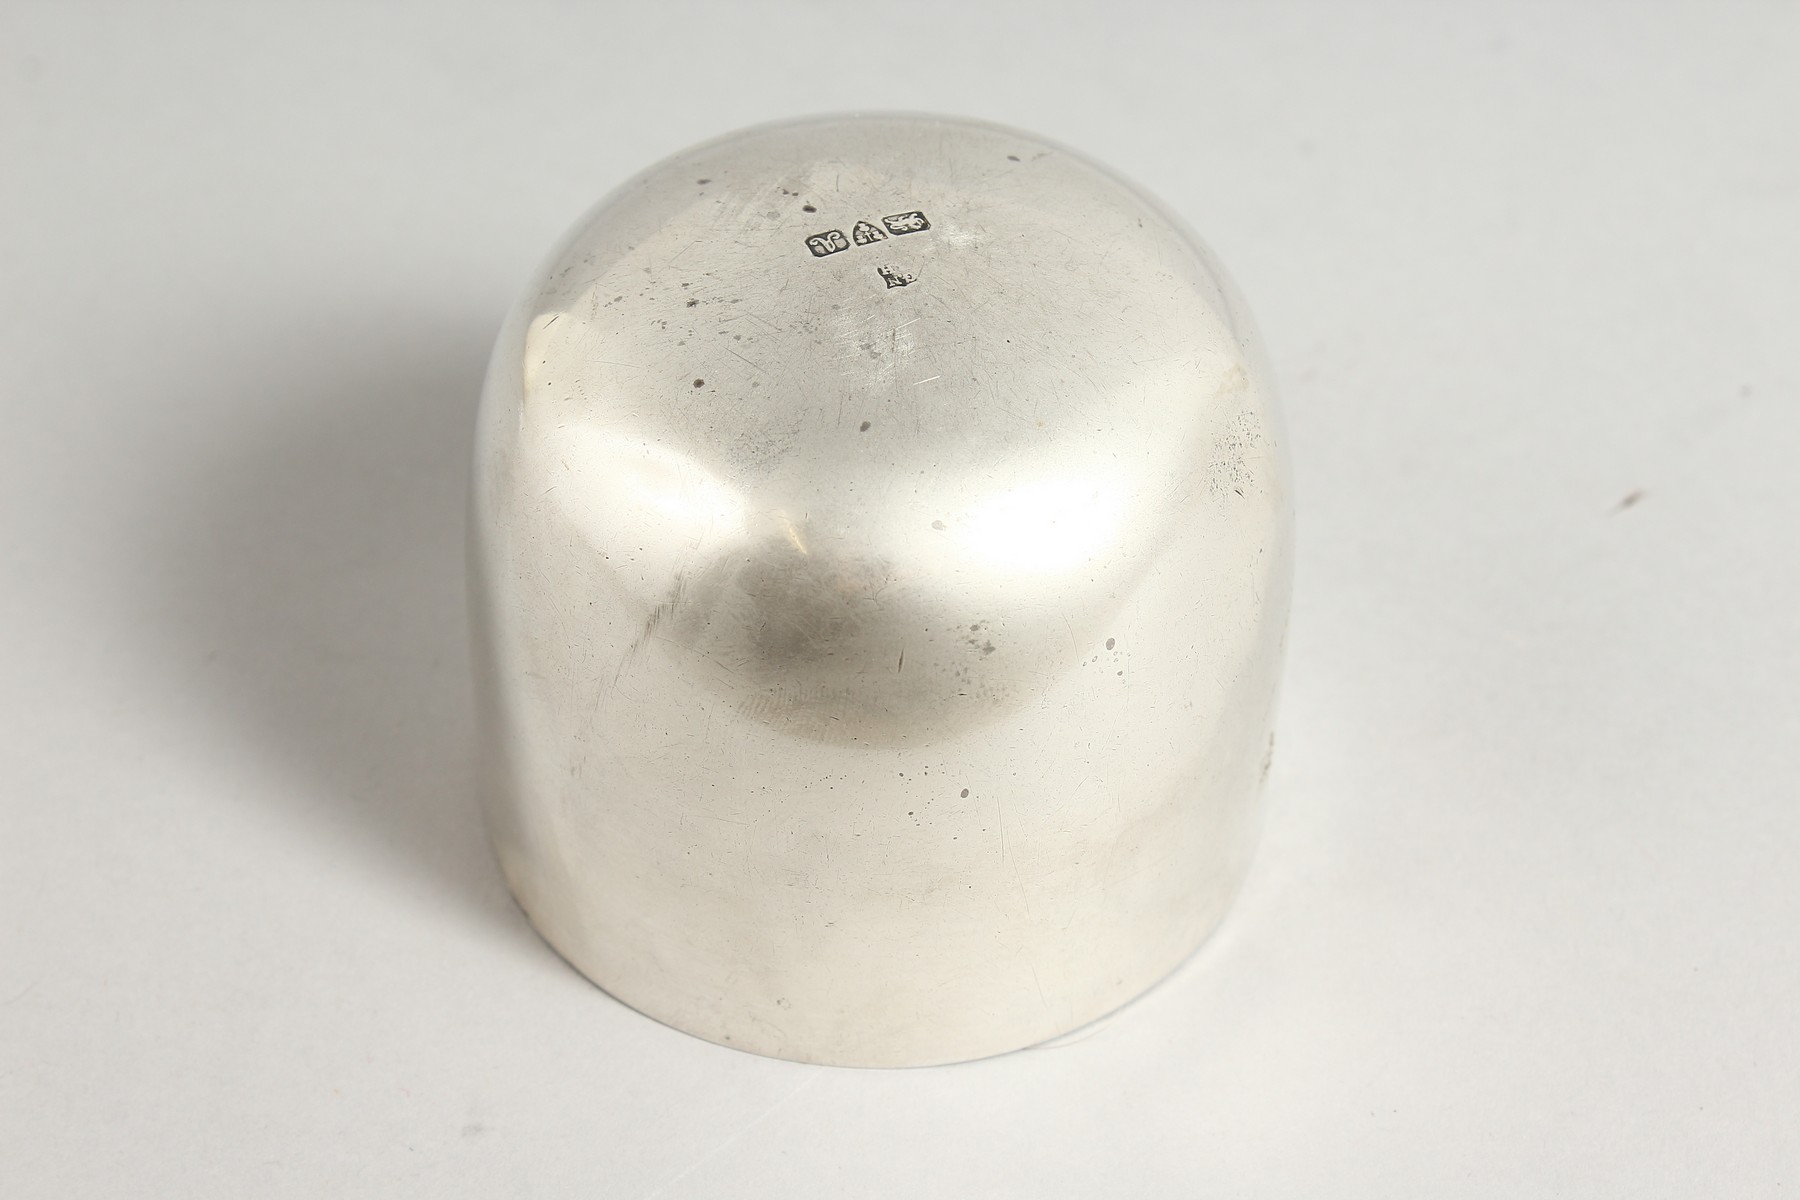 A PLAIN SILVER TUMBLER CUP. Chester 1901. - Image 2 of 3